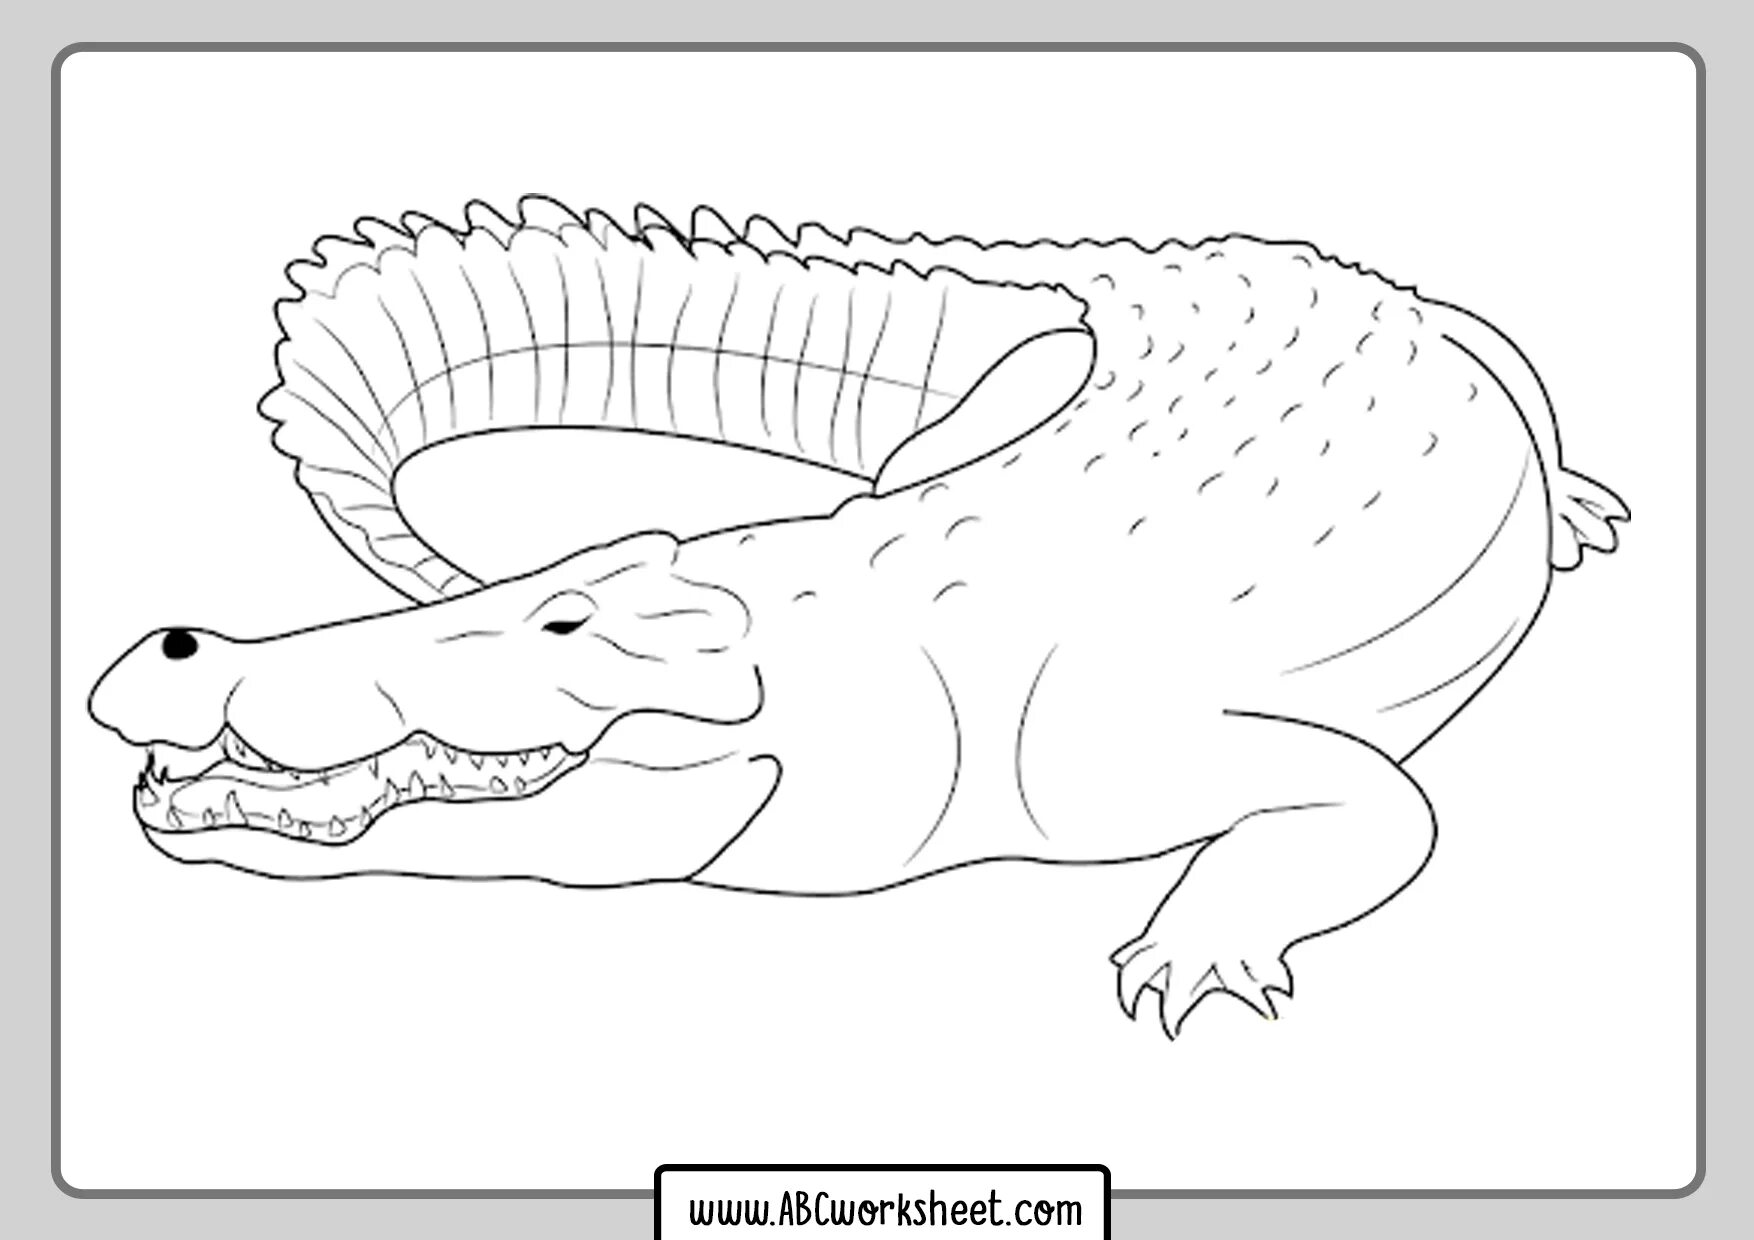 Coloring page graceful scalloped crocodile